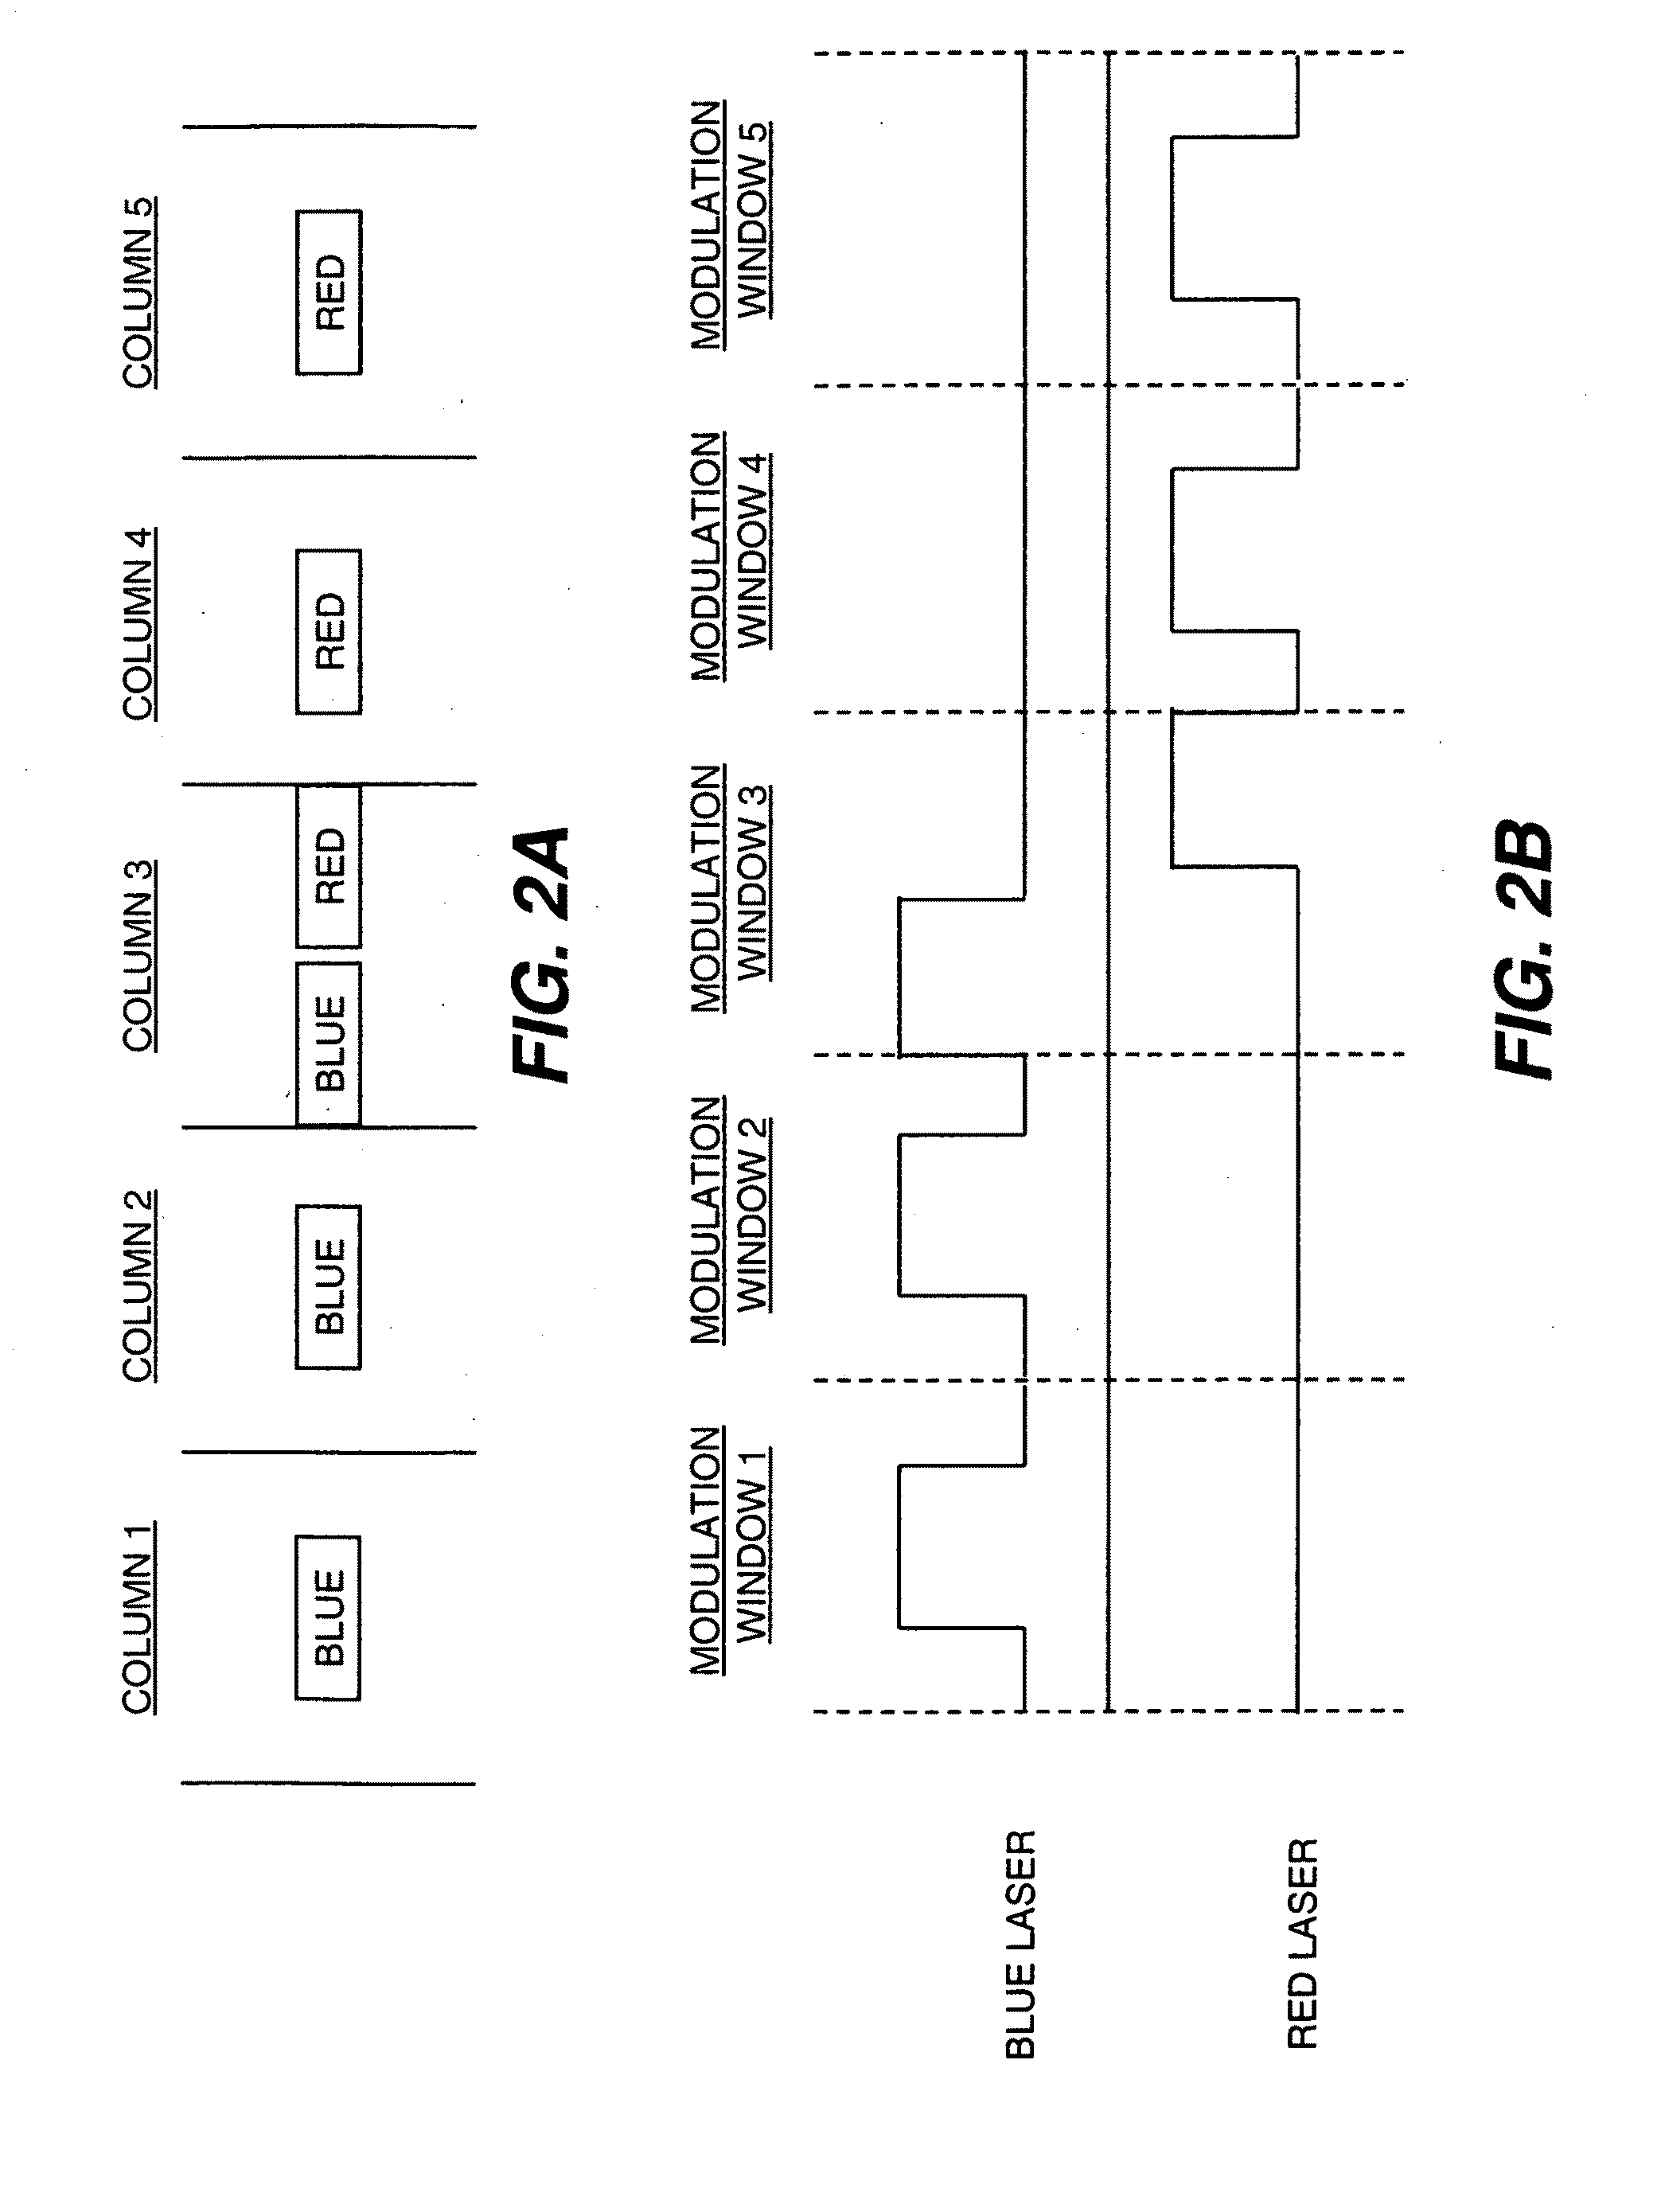 Edge reproduction in optical scanning displays